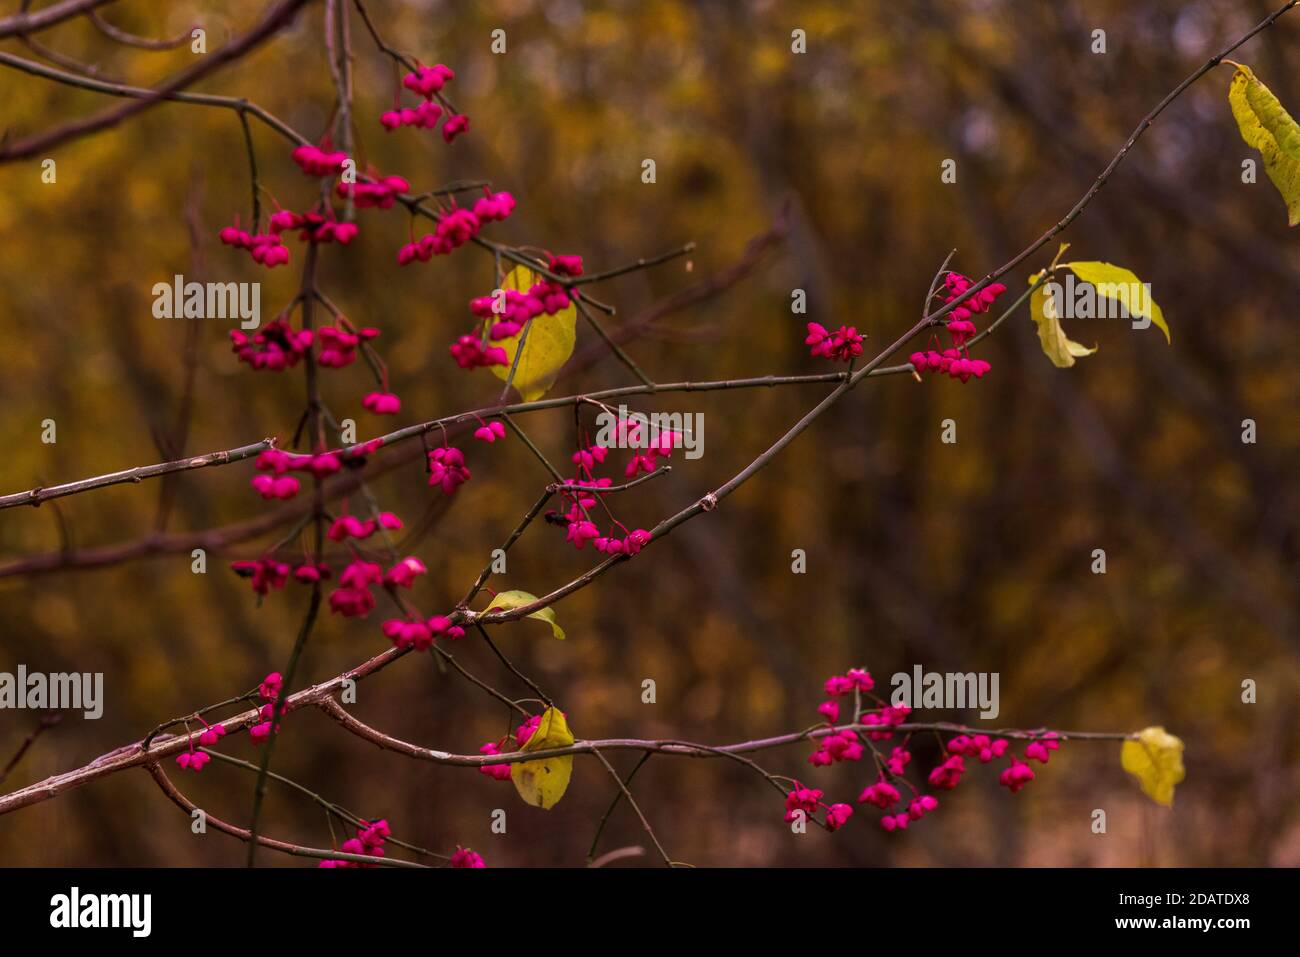 pink flowers bloomed on the branches of the trees during the autumn and another leaf remained on the branches before the winter cold Stock Photo